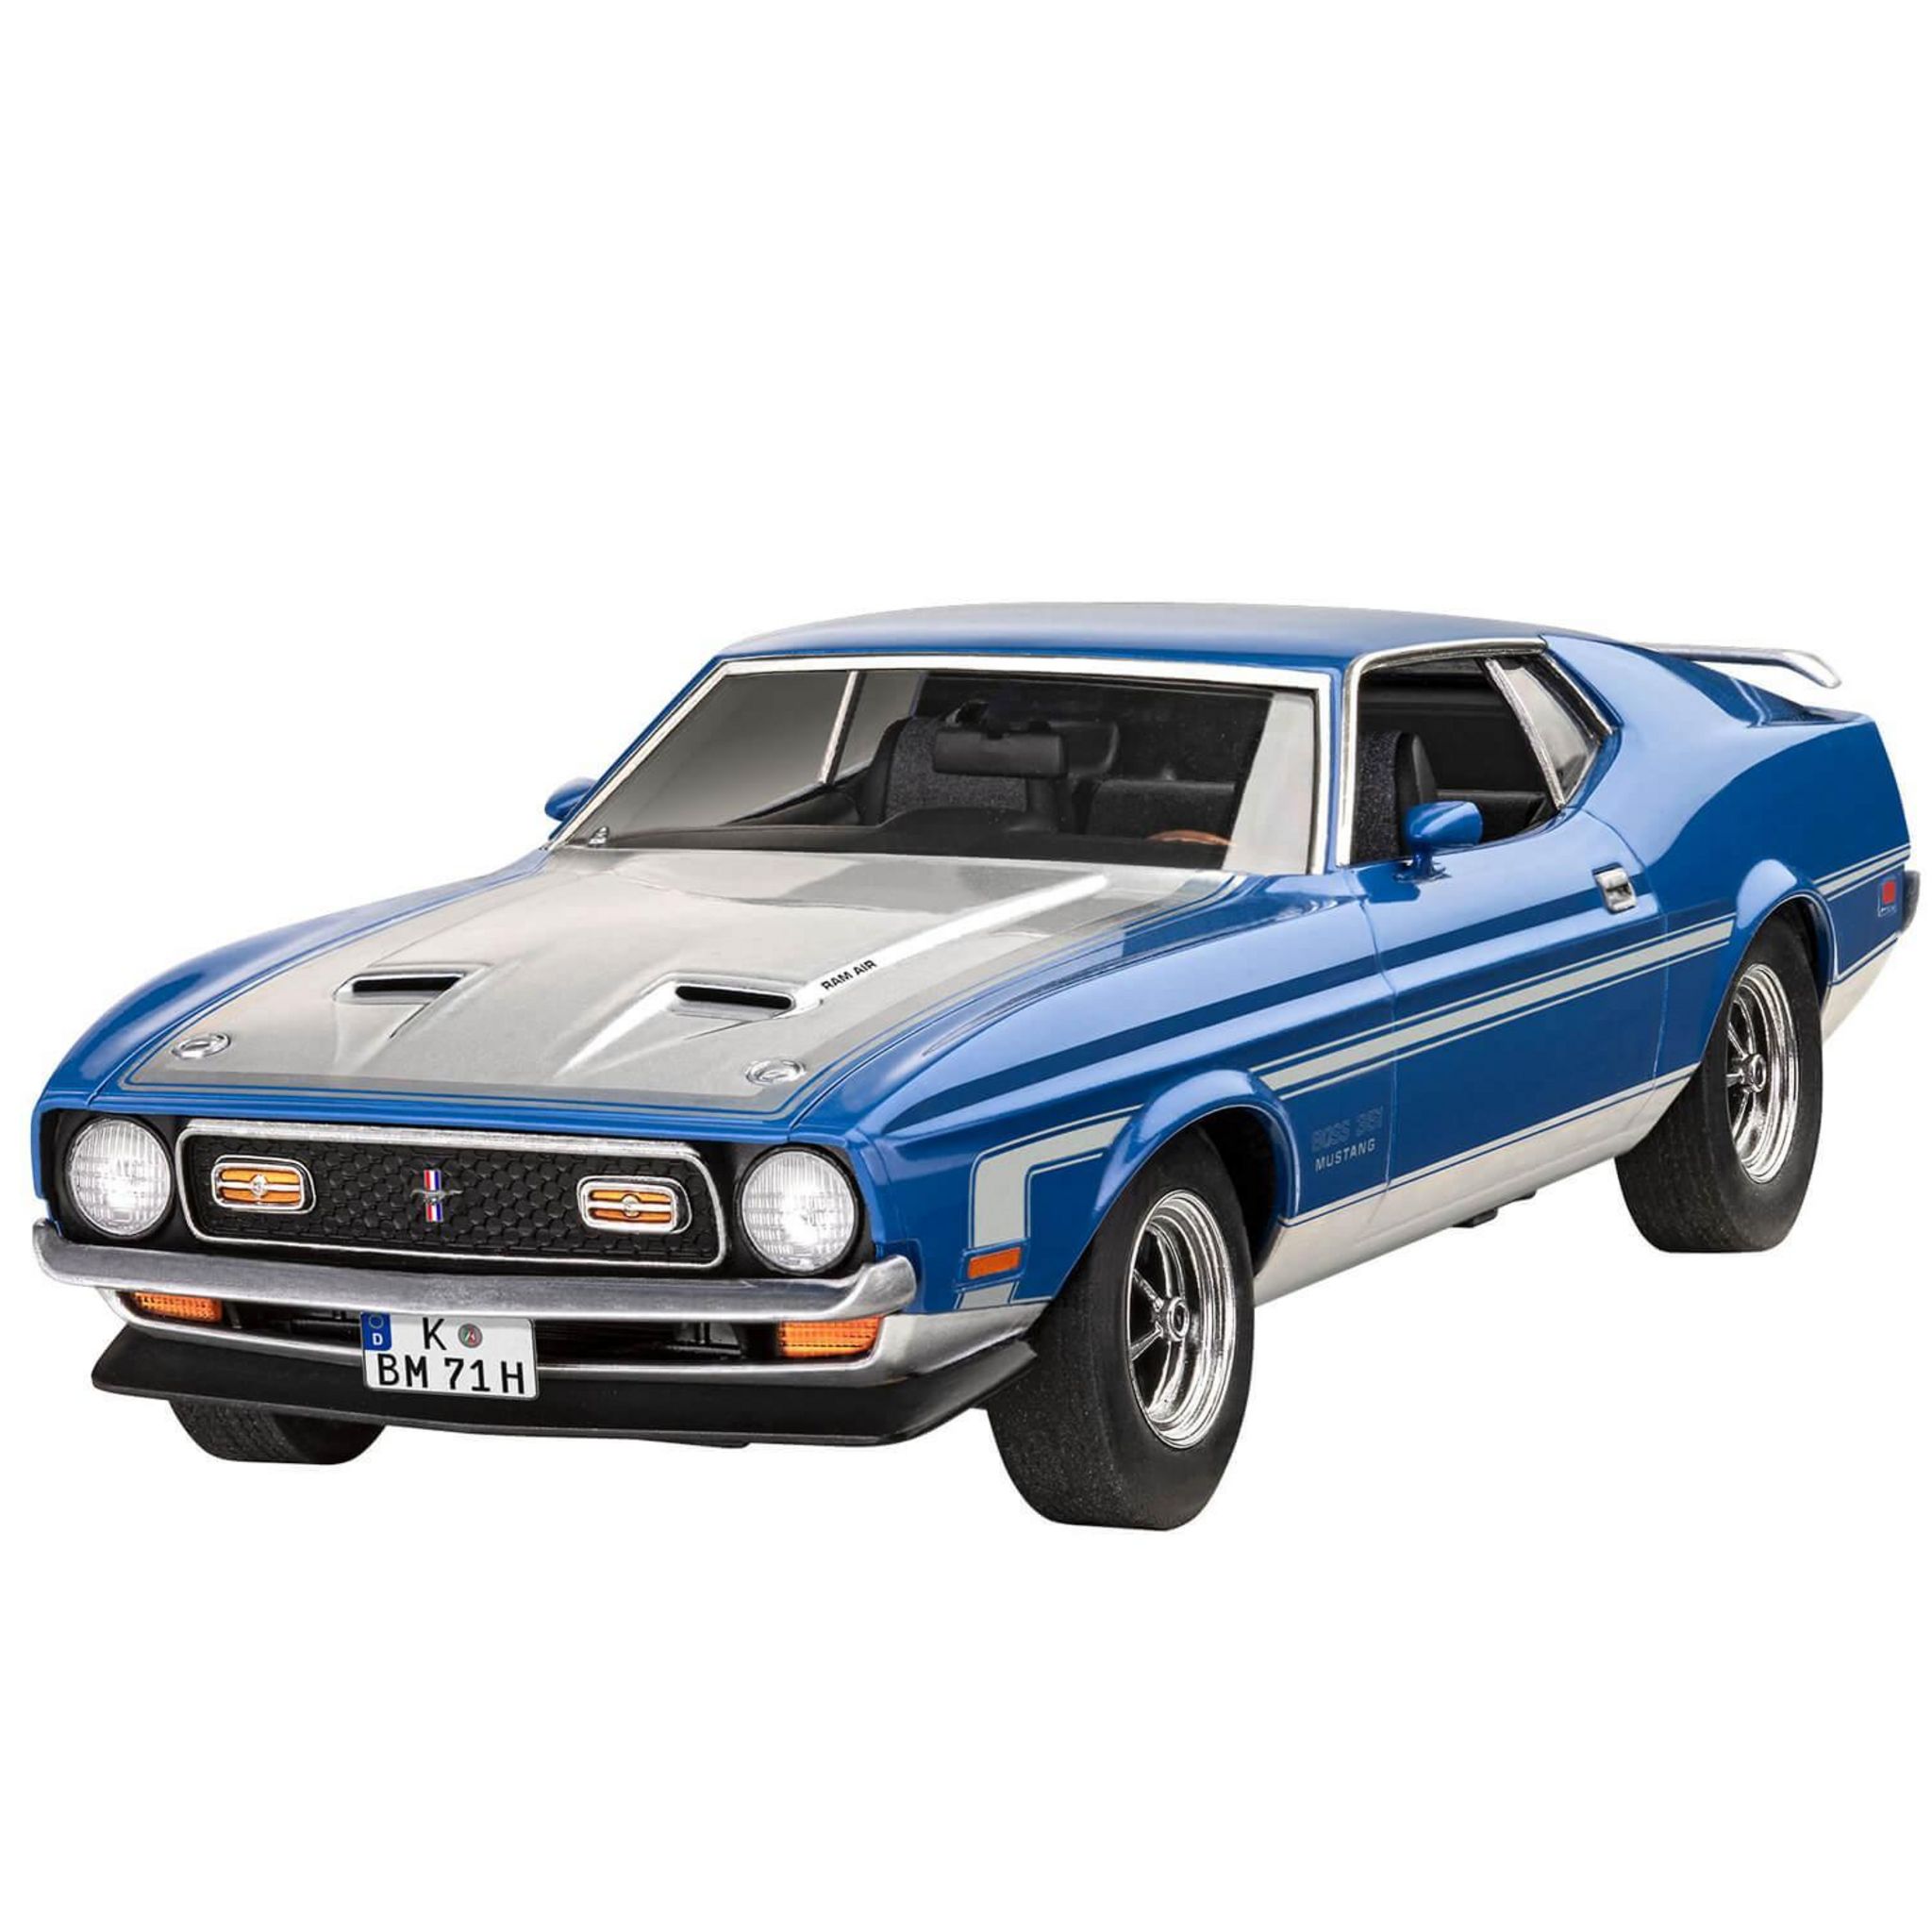 Maquette voiture : Quickbuild : Ford Mustang GT 196 - Airfix - Rue